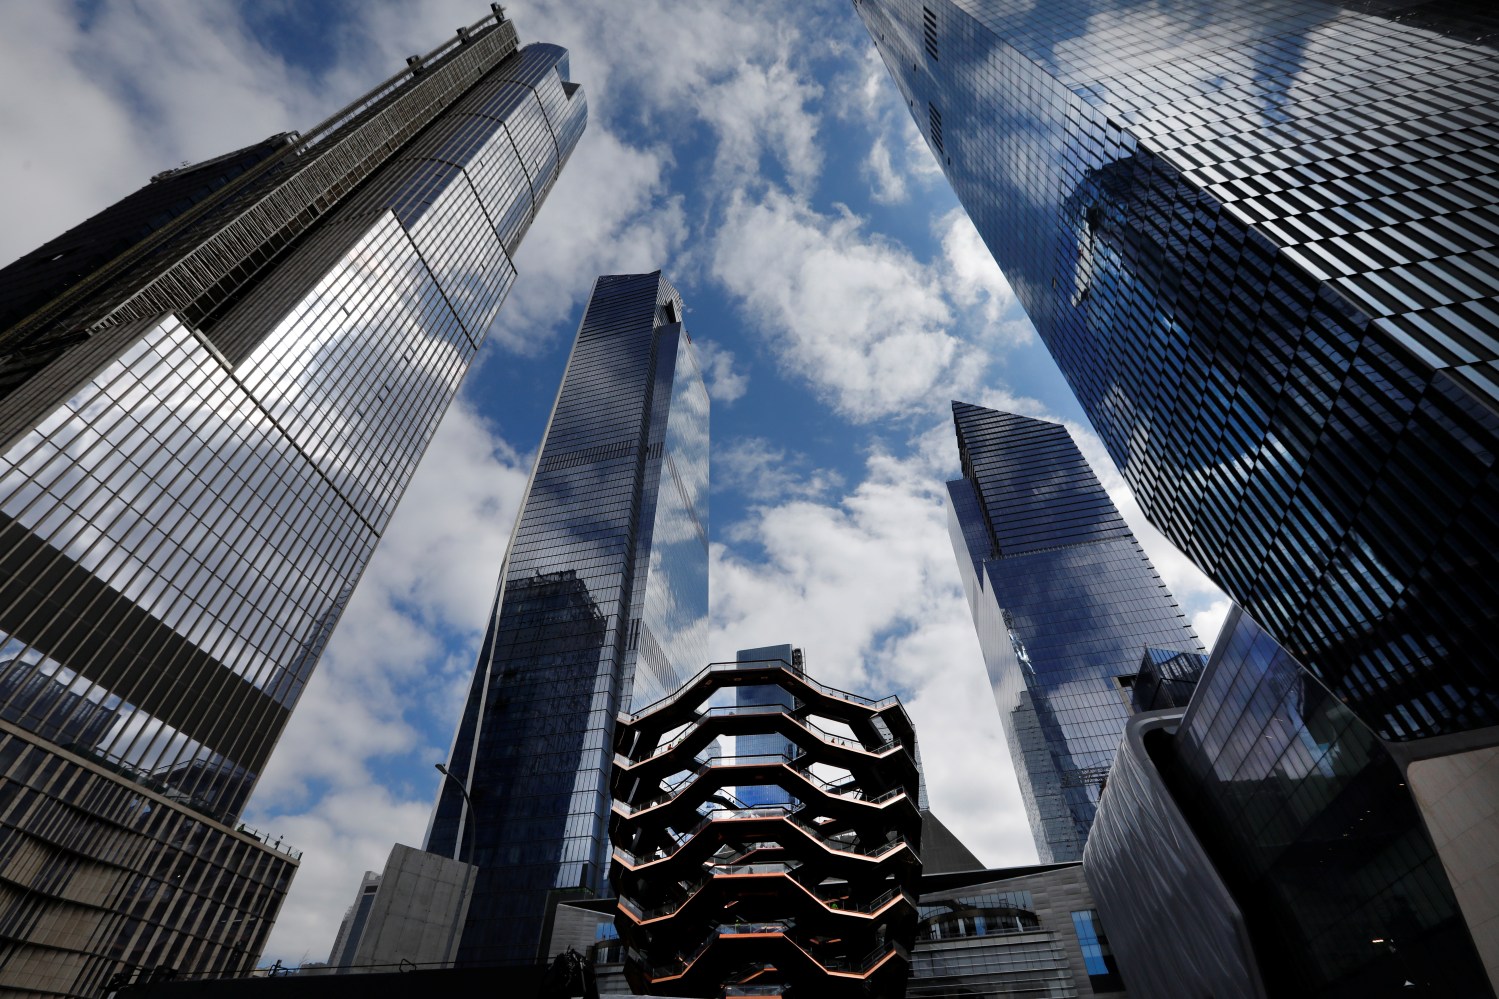 The Hudson Yards development on Manhattan's West side, which will have more than 18 million square feet of commercial and residential space and 14 acres of public parks and gardens including "The Vessel" (C) is seen New York City, New York, U.S., March 12, 2019. REUTERS/Mike Segar - RC1DF81C4870